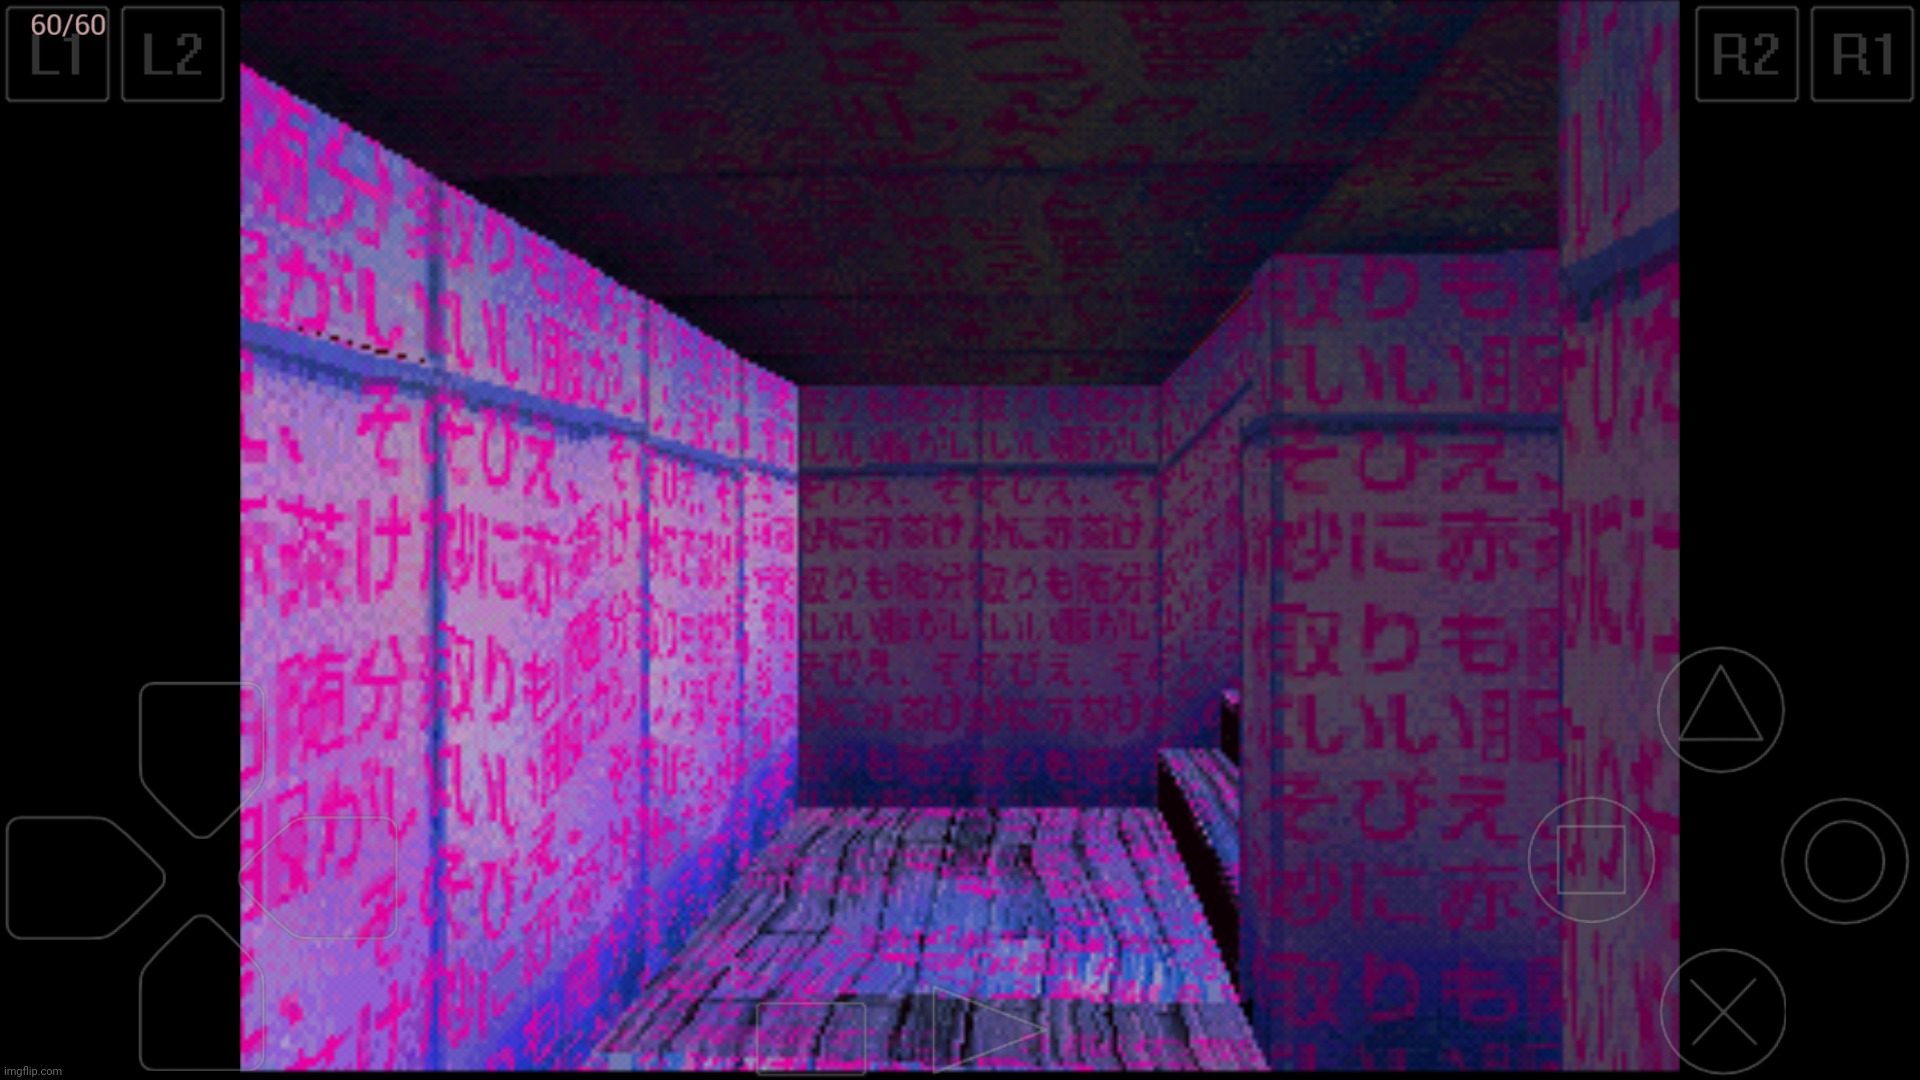 the walls and floors are suddenly covered in japanese text | made w/ Imgflip meme maker